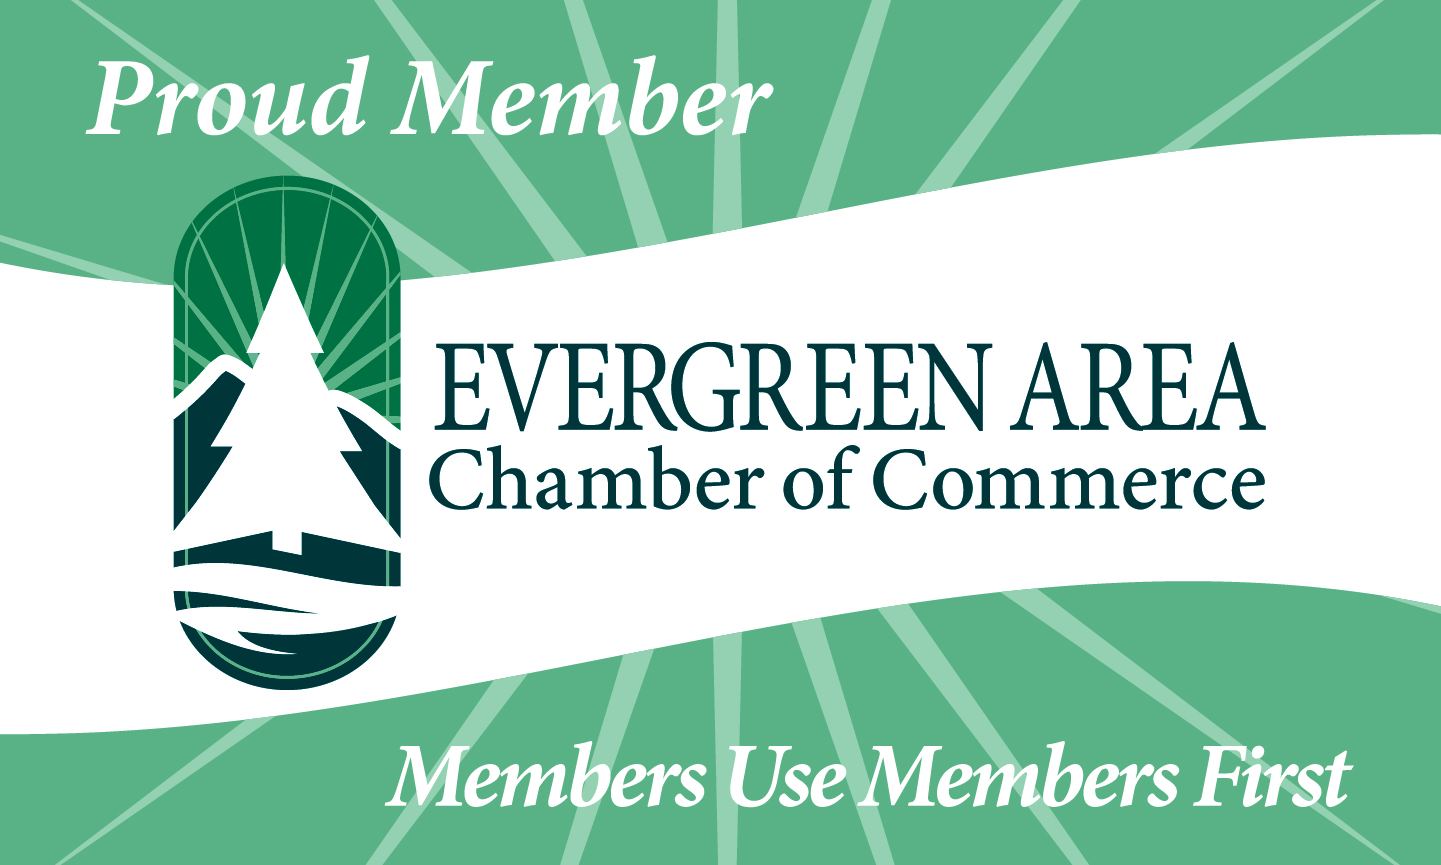 Evergreen Area Chamber of Commerce (Colorado)